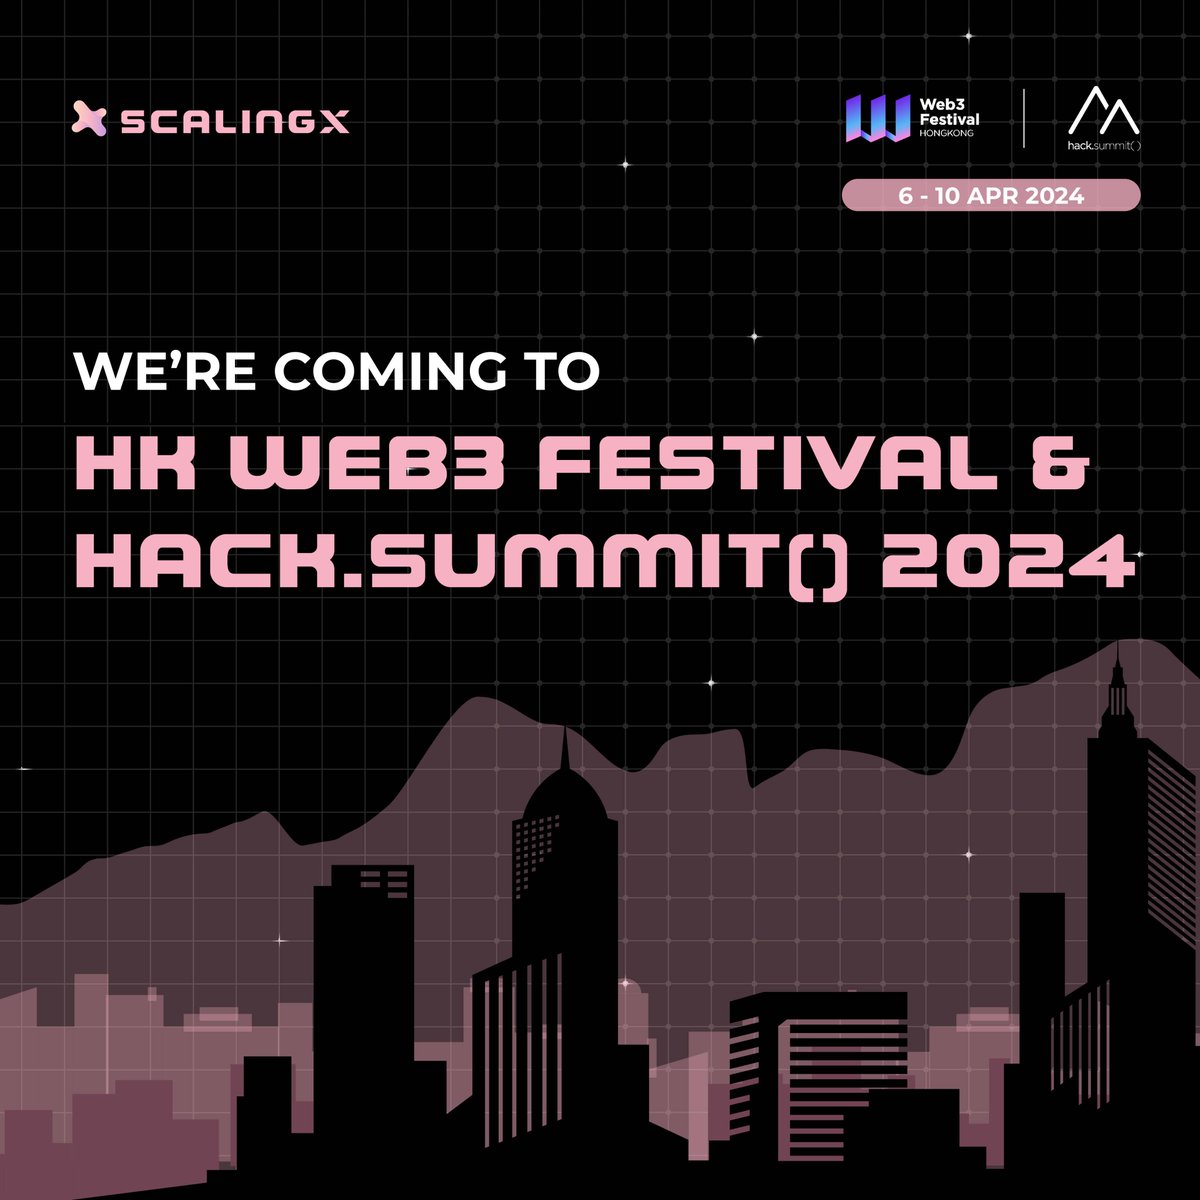 What's up #BUIDLers 😎 #ScalingX team is all geared up for #HKWeb3Festival & #HackSummit2024 🇭🇰 If you see us around the conference or site events, don't hesitate to stop by and chat with us 🚀